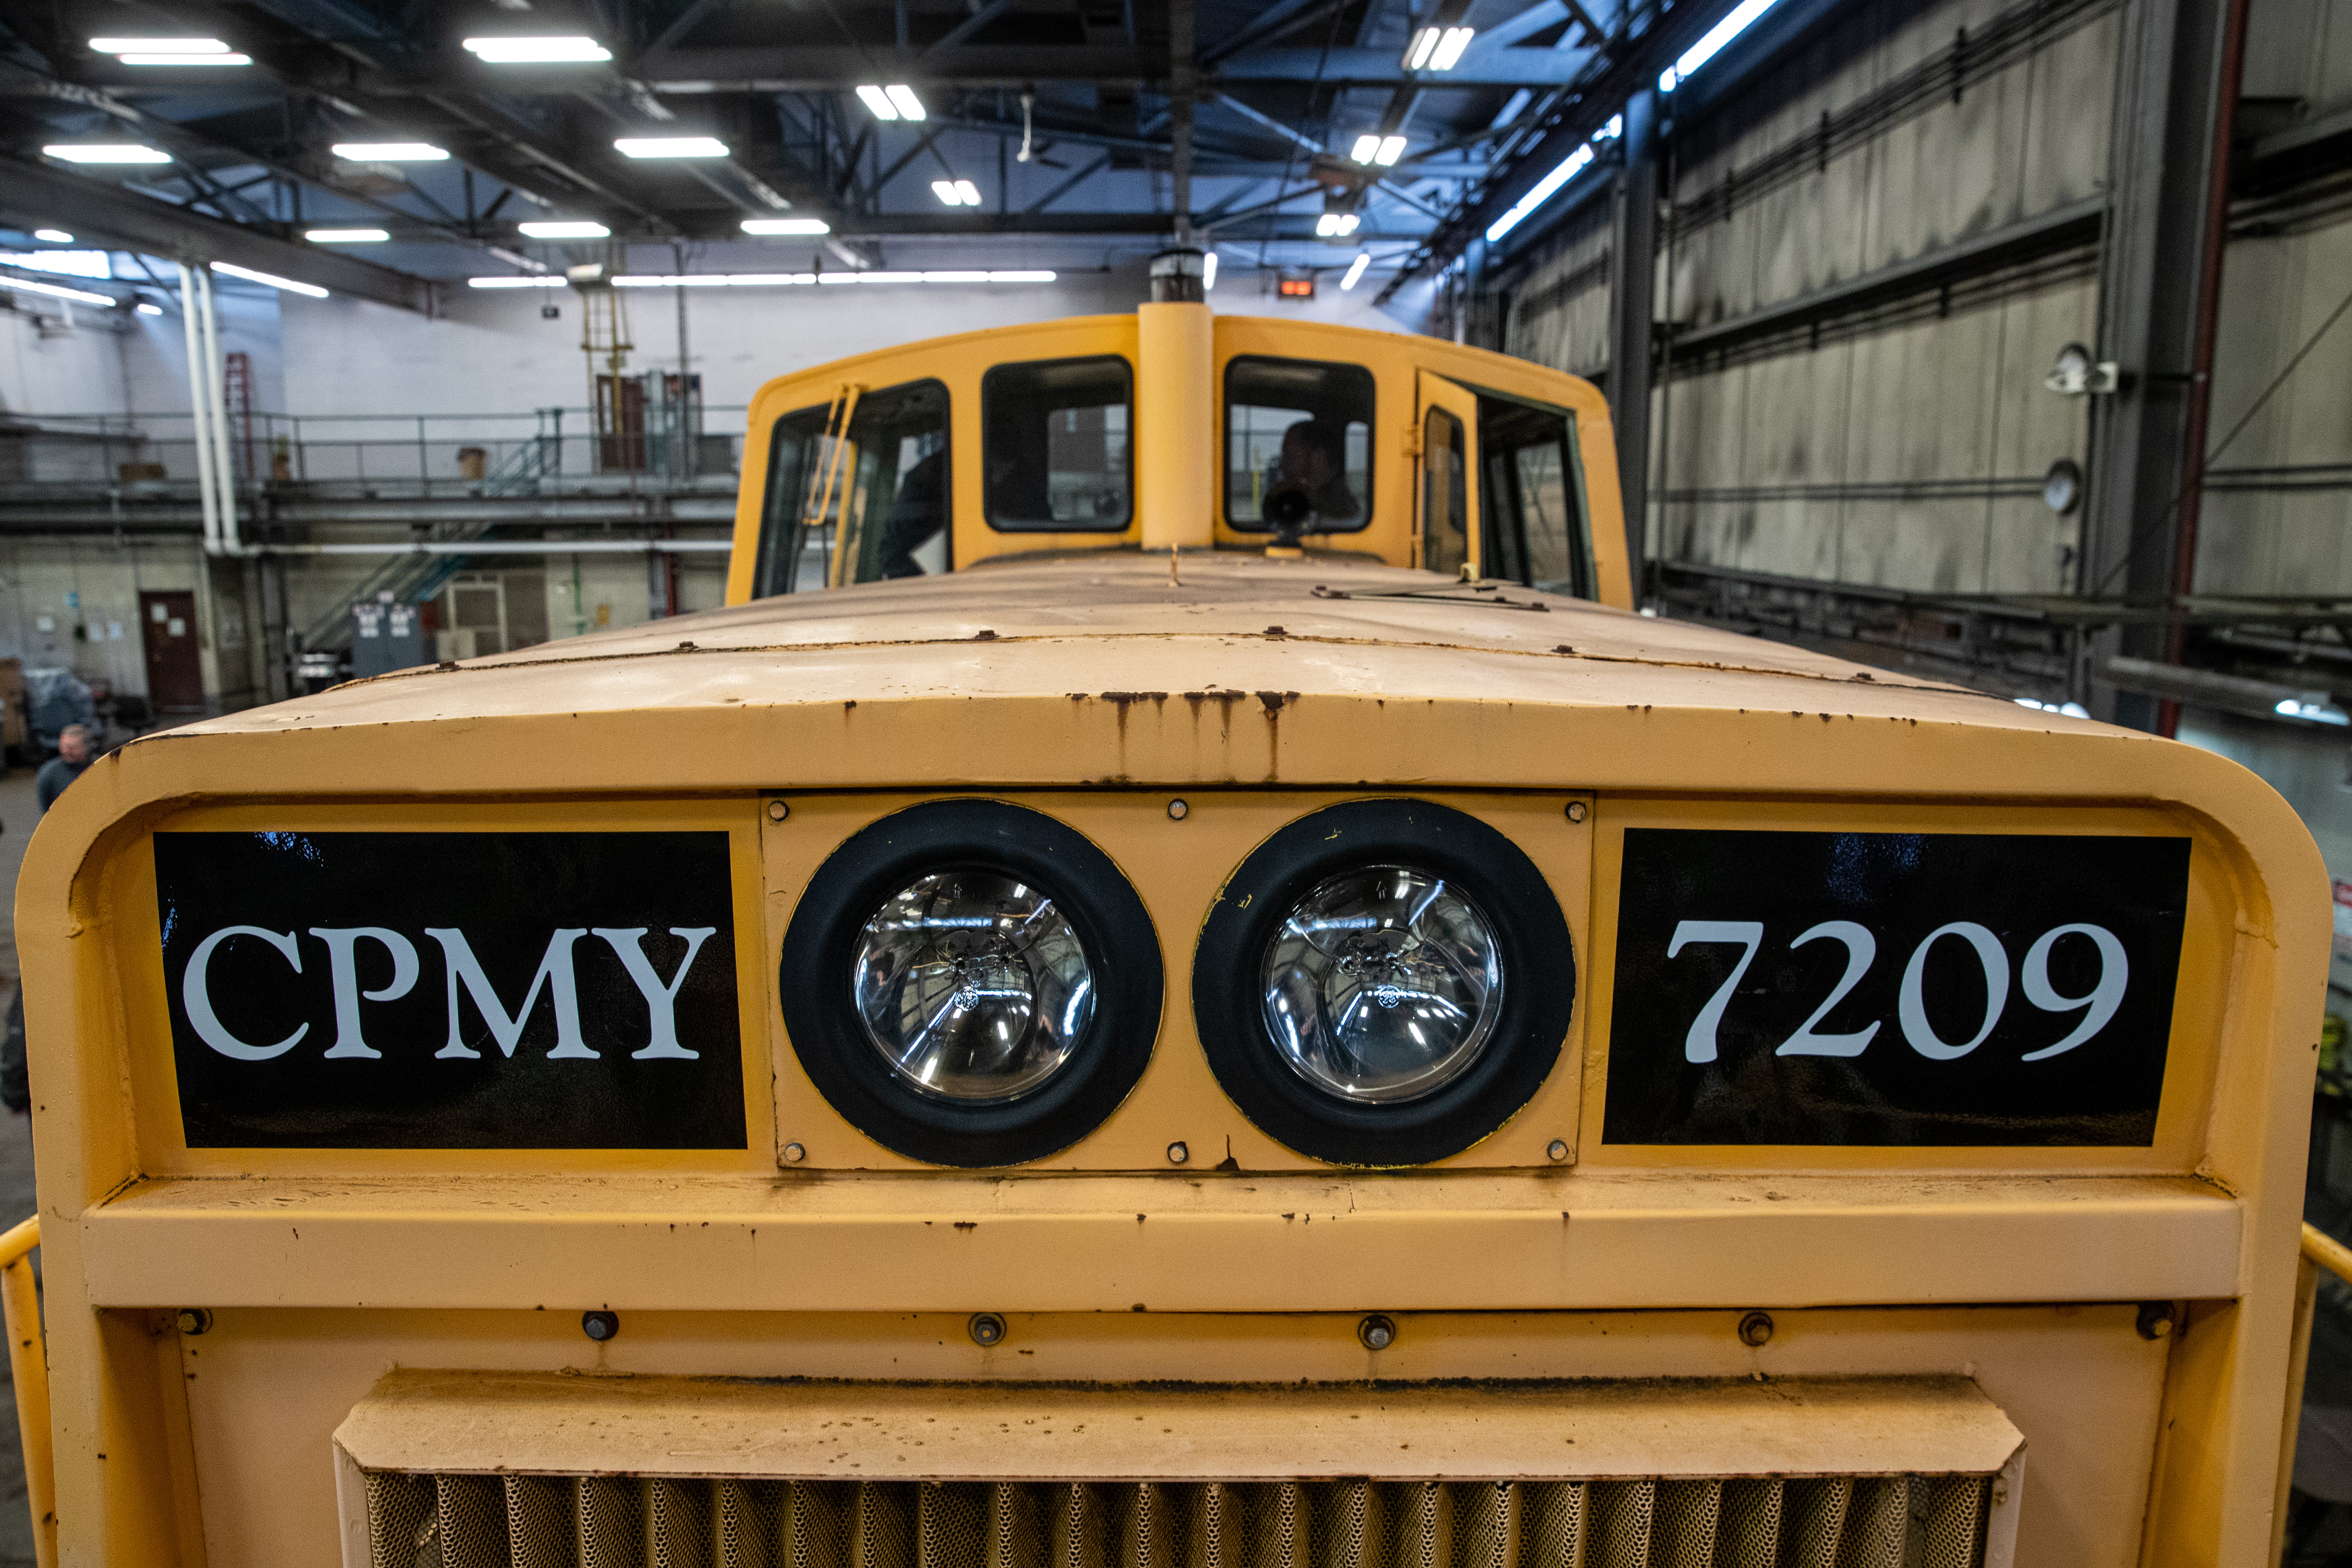 A 1979 GE diesel train locomotive at the Consumers Energy J.H. Campbell plant in Port Sheldon Township on Monday, Feb. 13, 2023. Consumers Energy is donating the locomotive to the Coopersville and Marne Railway. (Cory Morse | MLive.com)